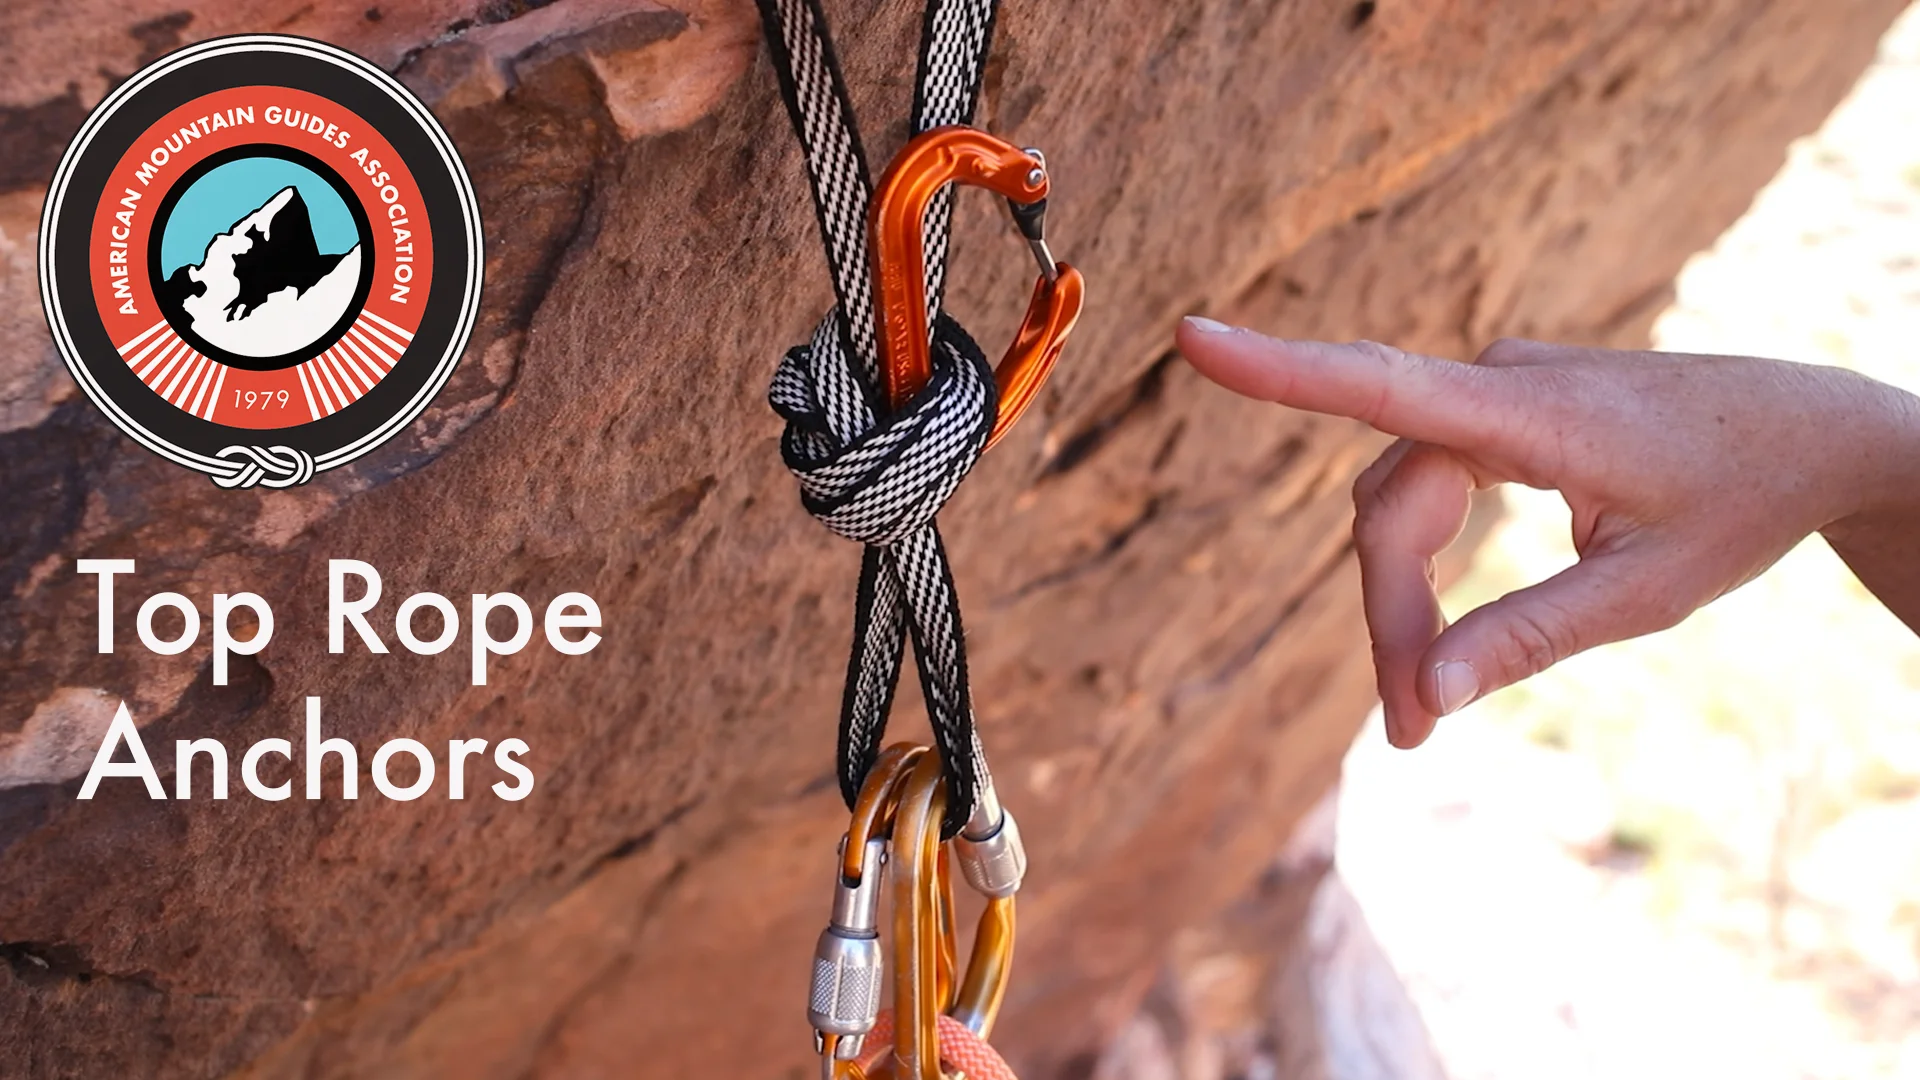 Top Rope Anchors on Vimeo